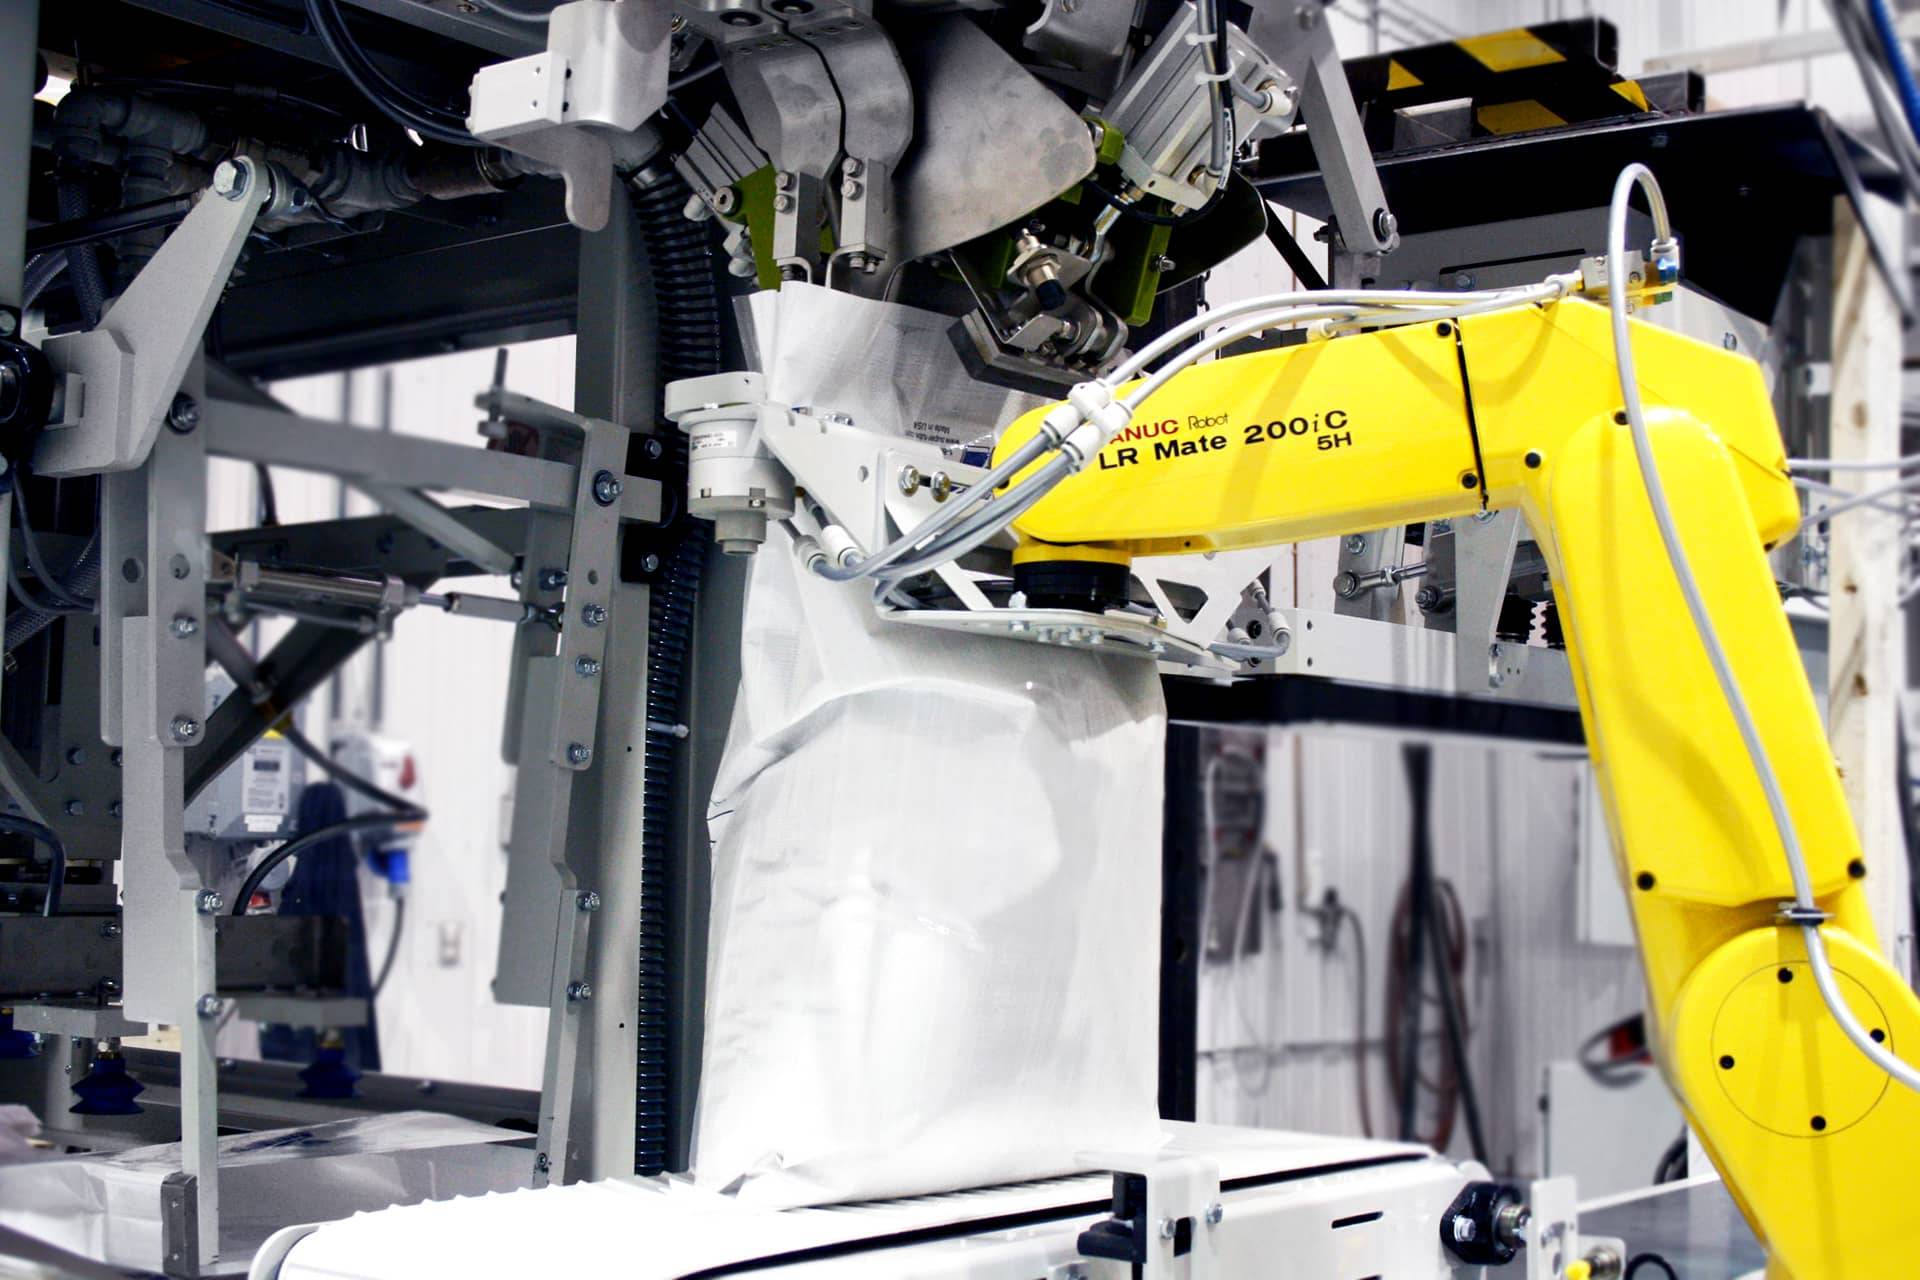 A robotic arm holds an open-mouth bag in place during the filling process